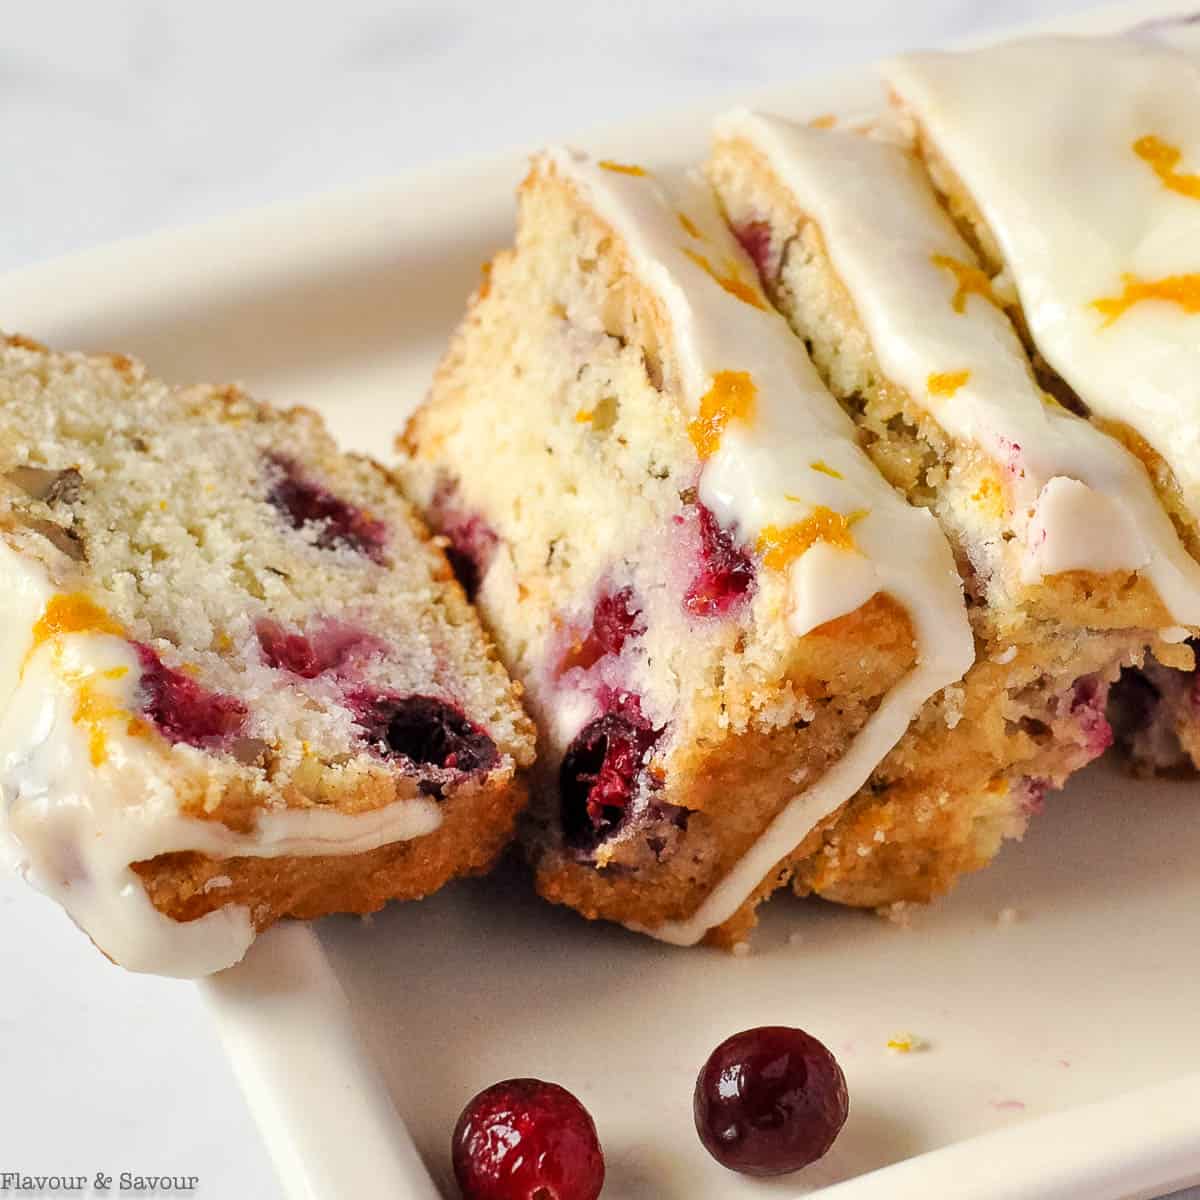 DIY Christmas gifts: Make a mini cranberry bread loaf